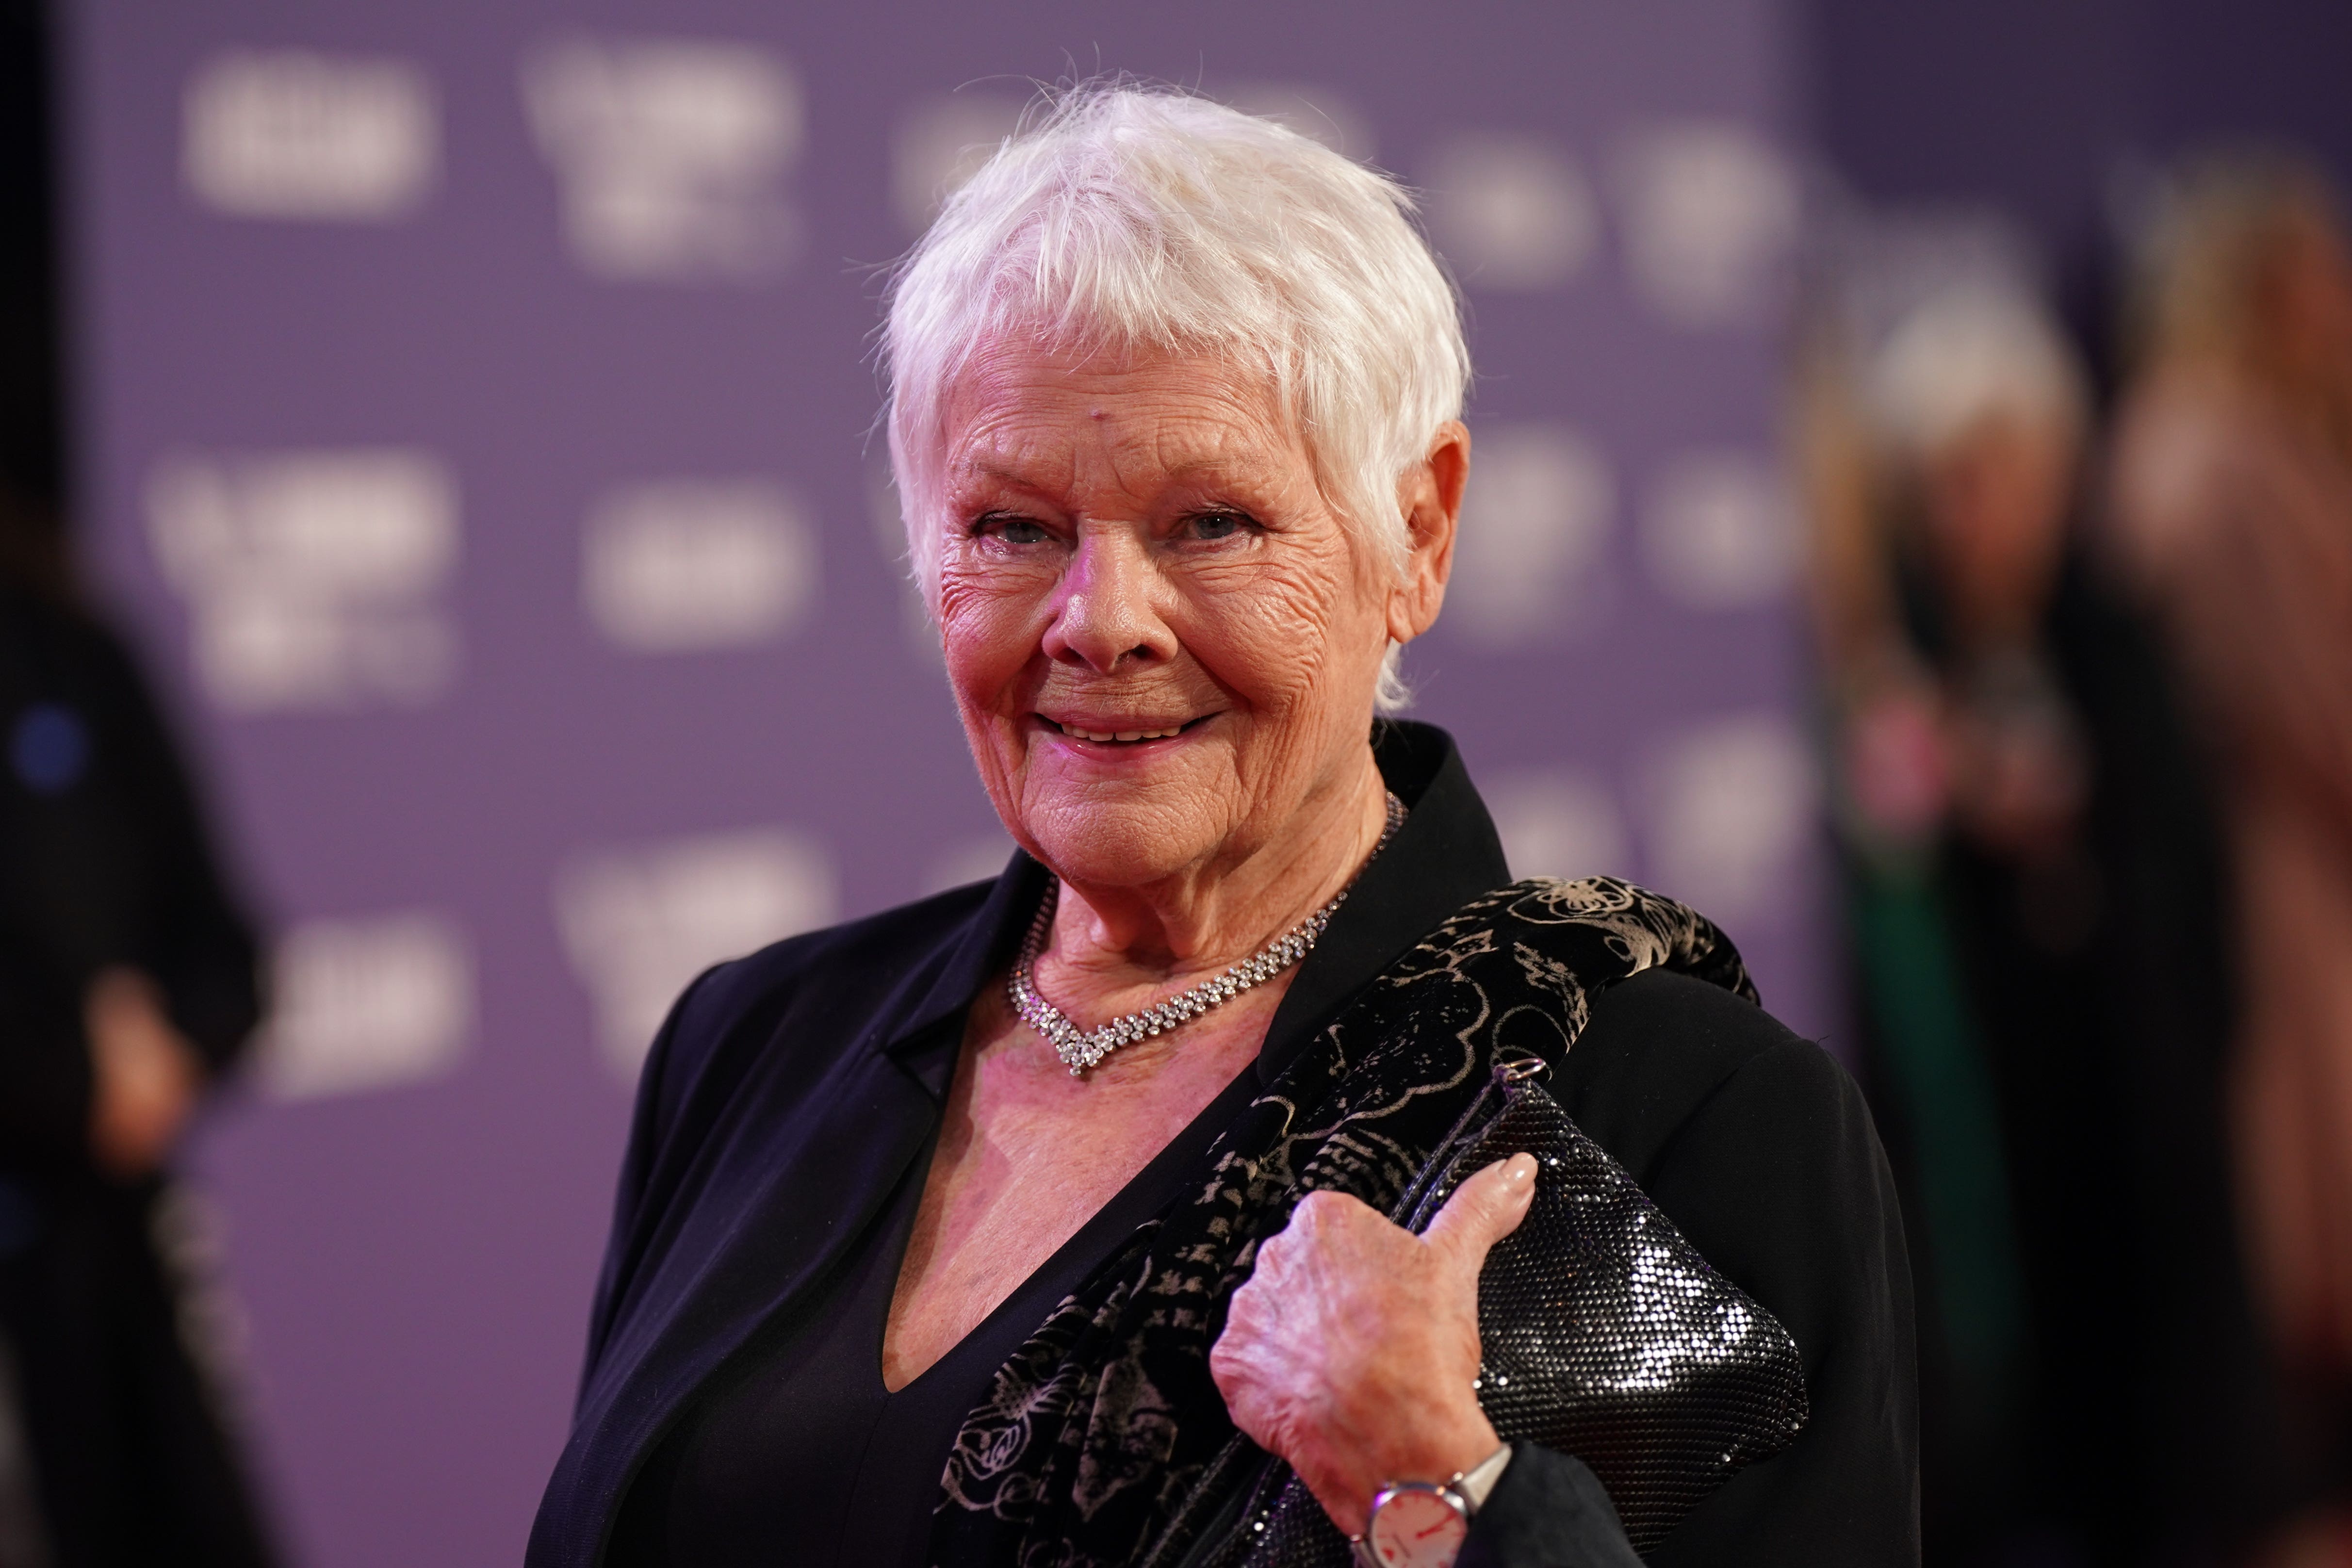 Winners of Portrait Artist of the Year to paint Judi Dench for Sky Arts special The Independent